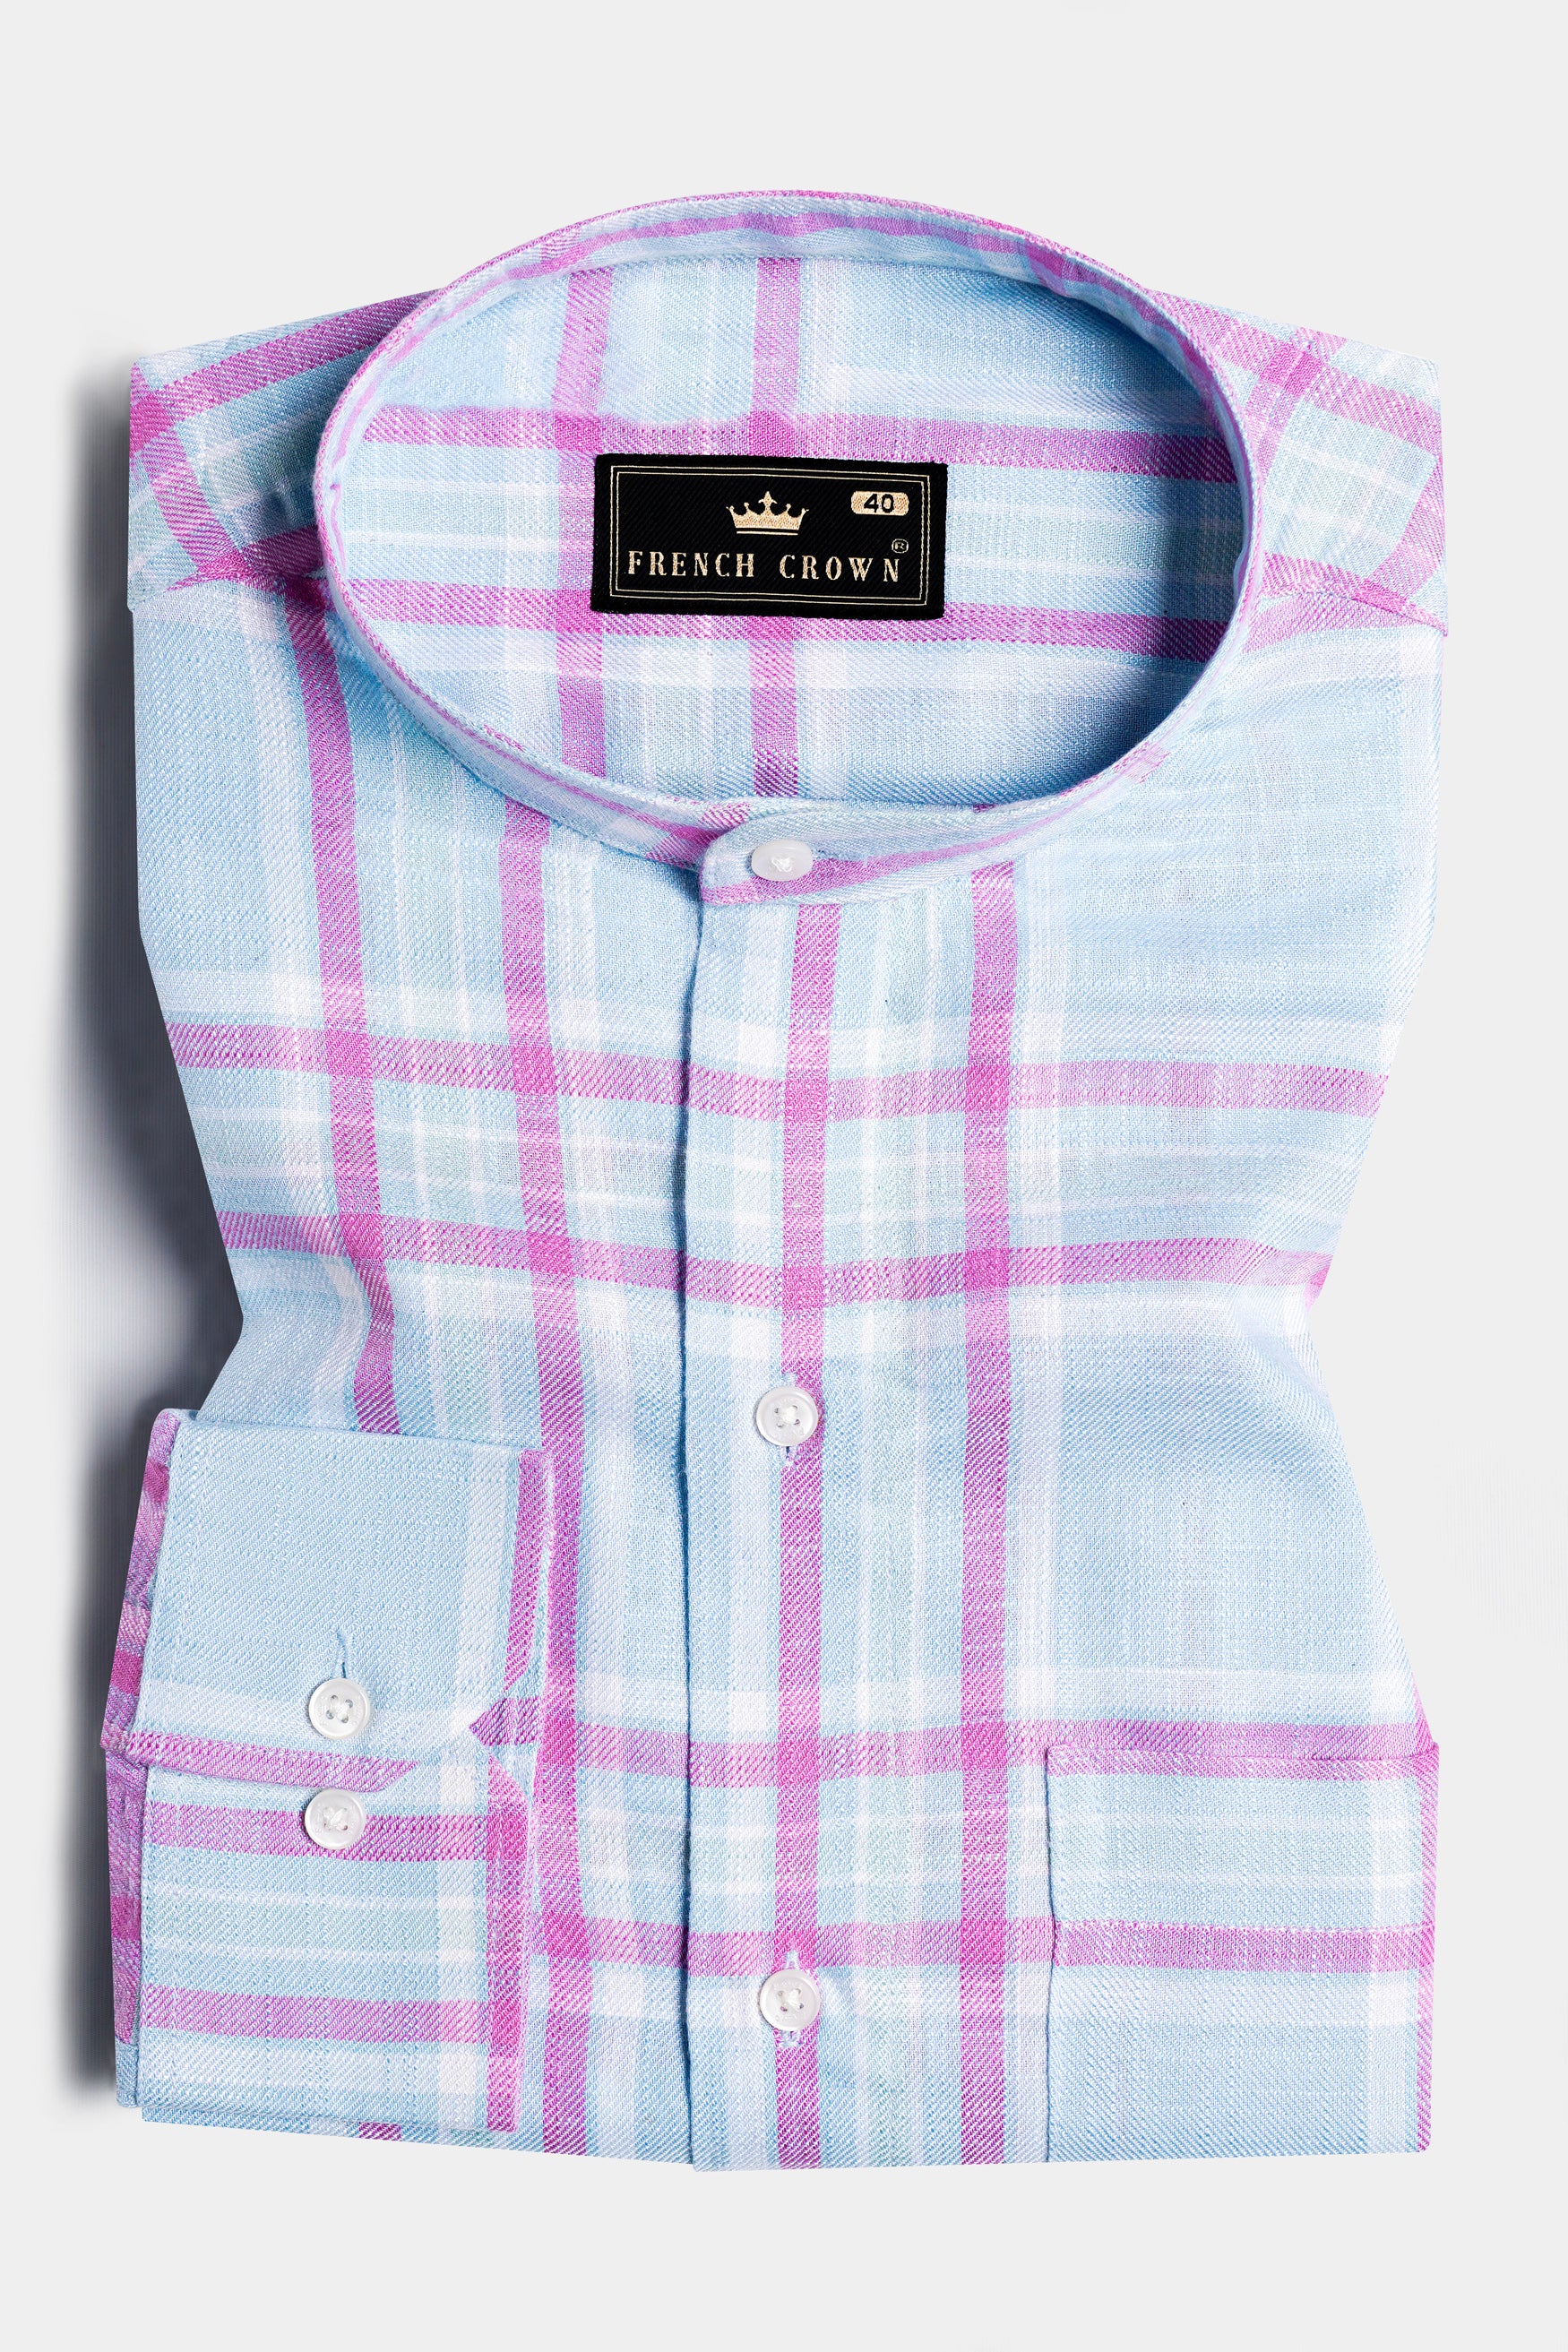 Spindle Blue and Fuchsia Pink Twill Plaid Premium Cotton Shirt 11699-M-38, 11699-M-H-38, 11699-M-39, 11699-M-H-39, 11699-M-40, 11699-M-H-40, 11699-M-42, 11699-M-H-42, 11699-M-44, 11699-M-H-44, 11699-M-46, 11699-M-H-46, 11699-M-48, 11699-M-H-48, 11699-M-50, 11699-M-H-50, 11699-M-52, 11699-M-H-52